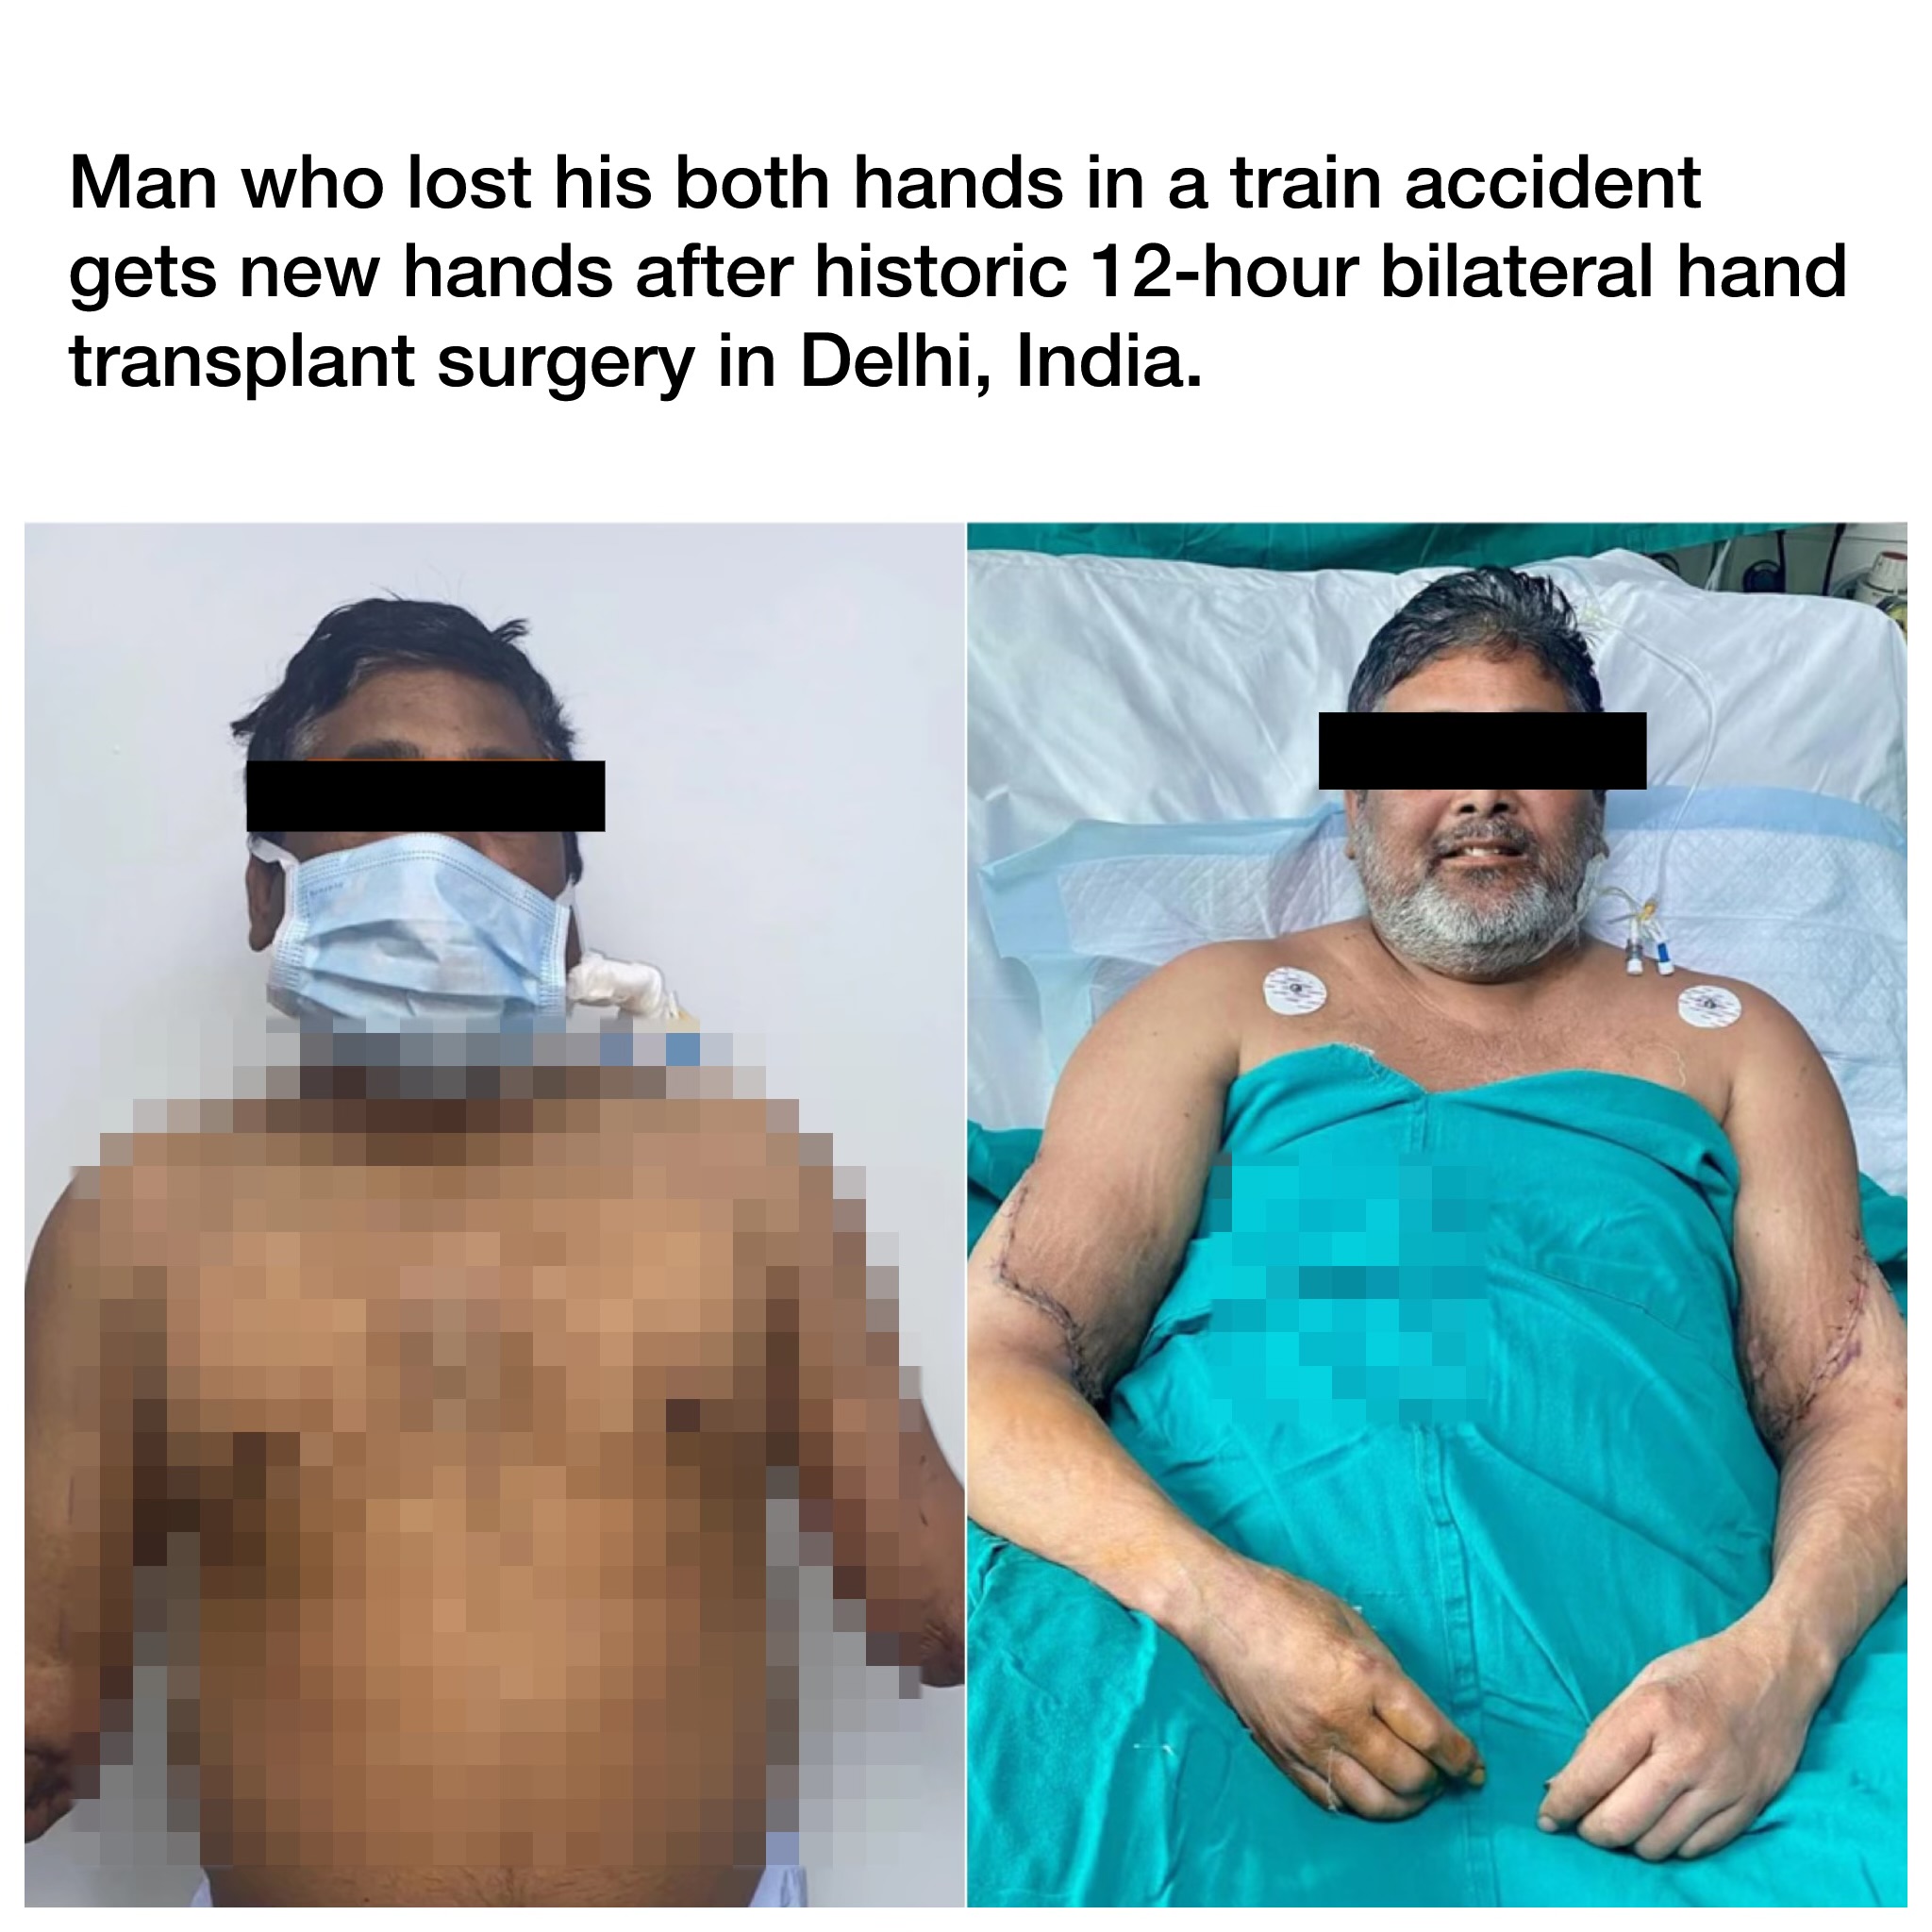 Miracle in Delhi: Man Receives New Hands in Landmark 12-Hour Bilateral Hand Transplant Surgery